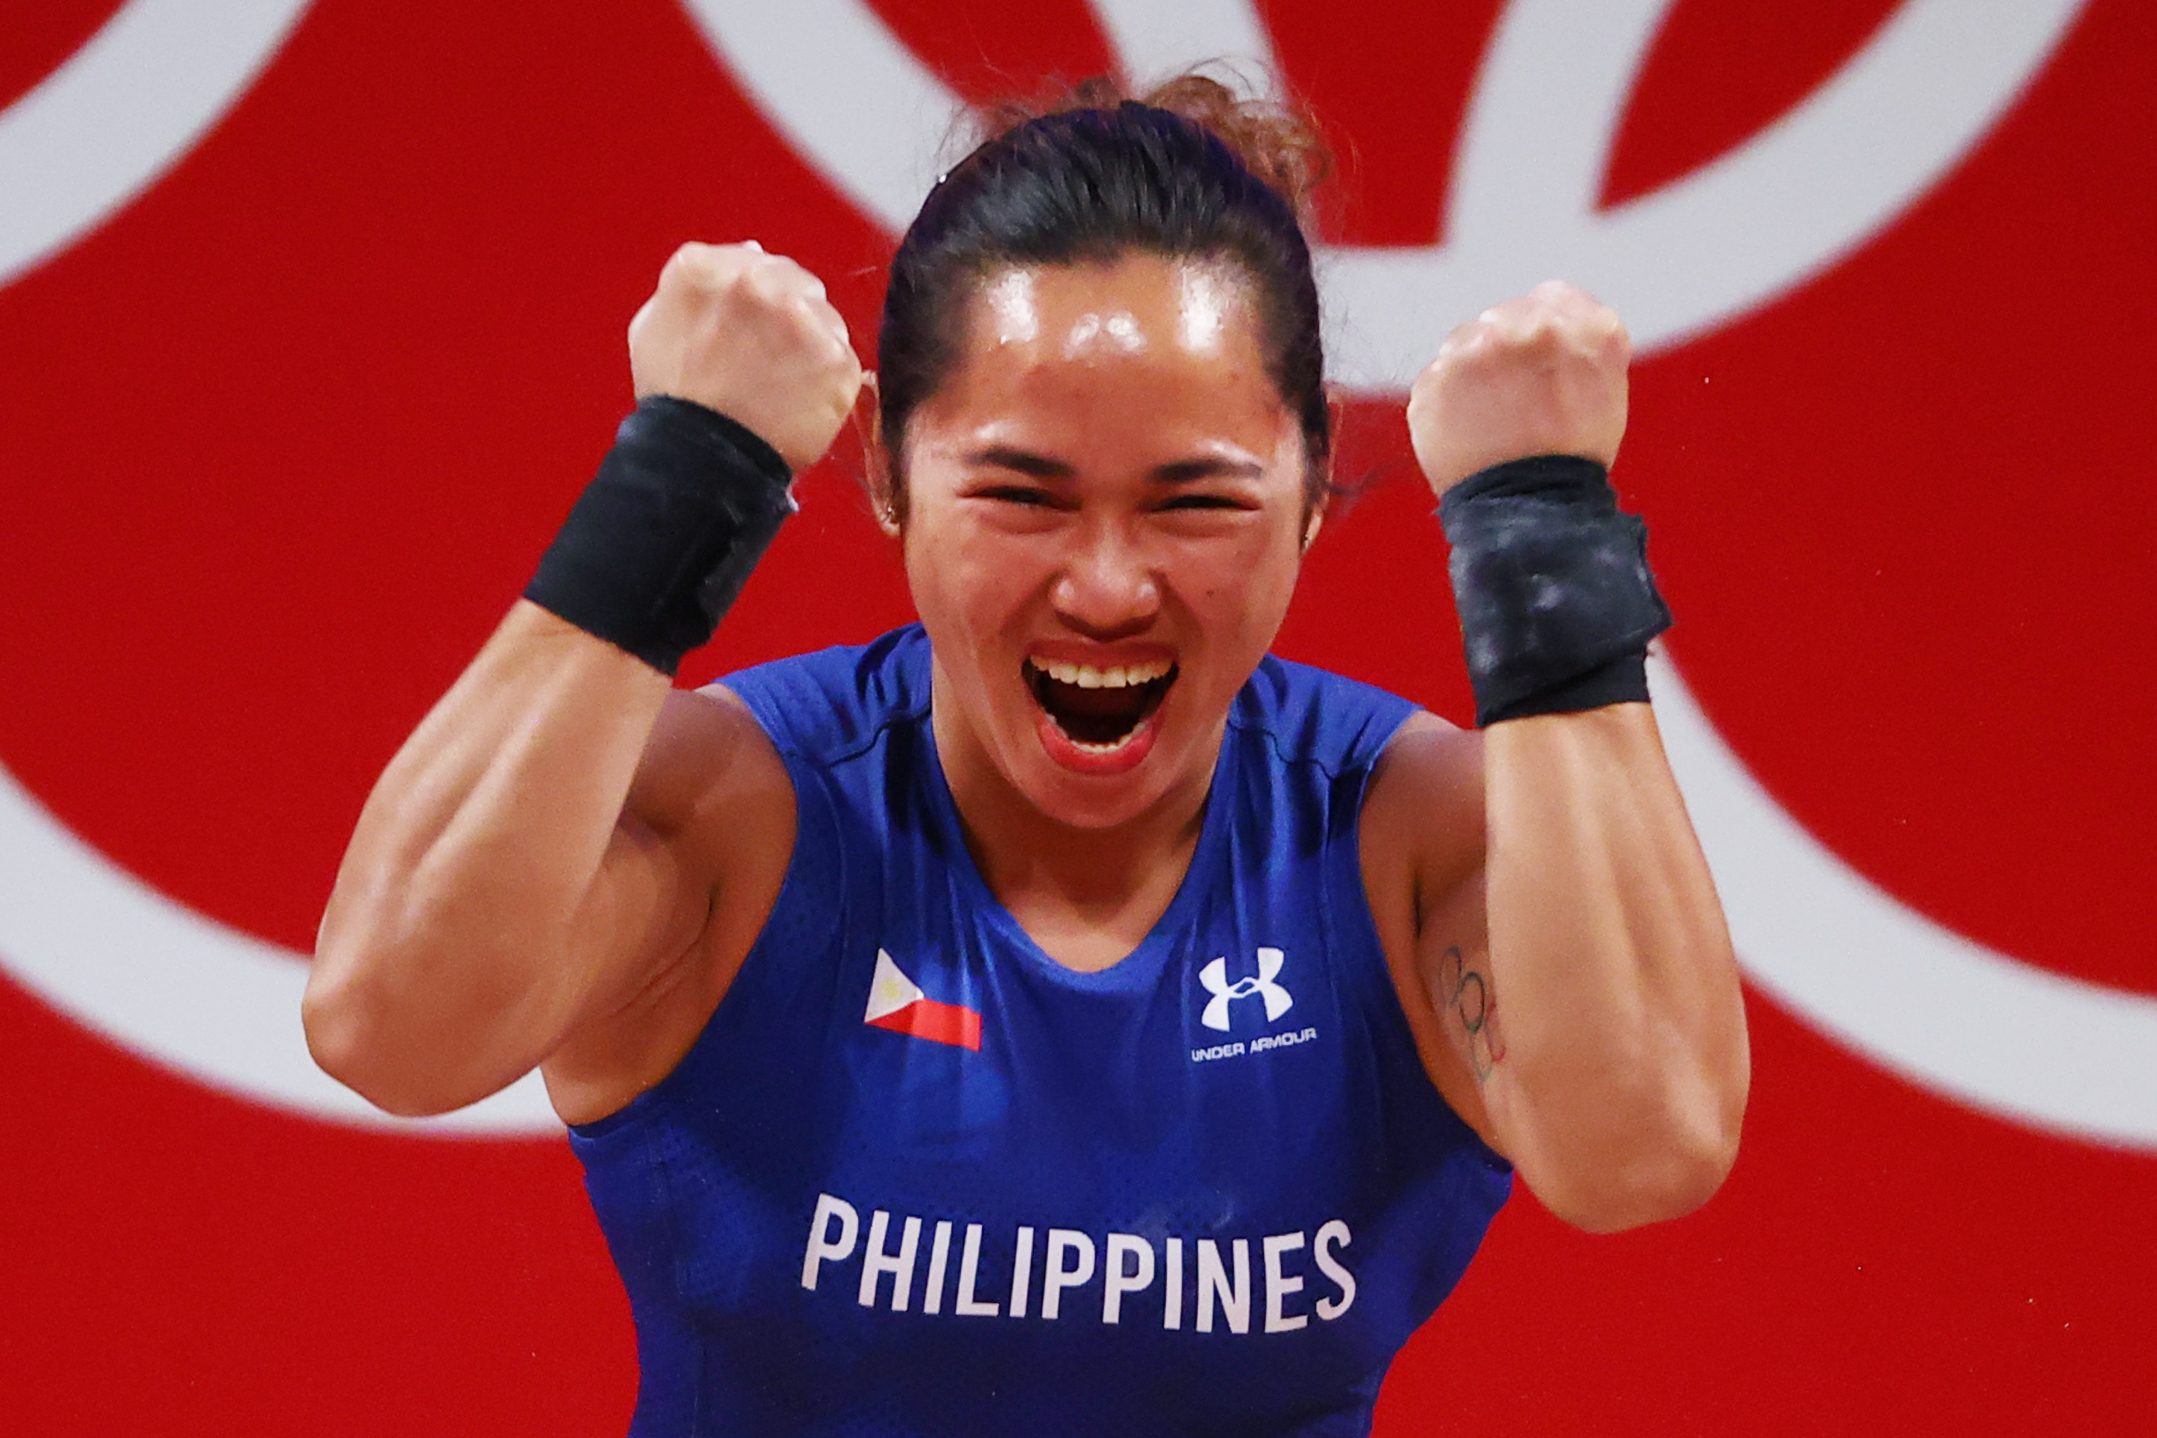 Philippine sportswriters to honor Hidilyn Diaz as Athlete of the Year